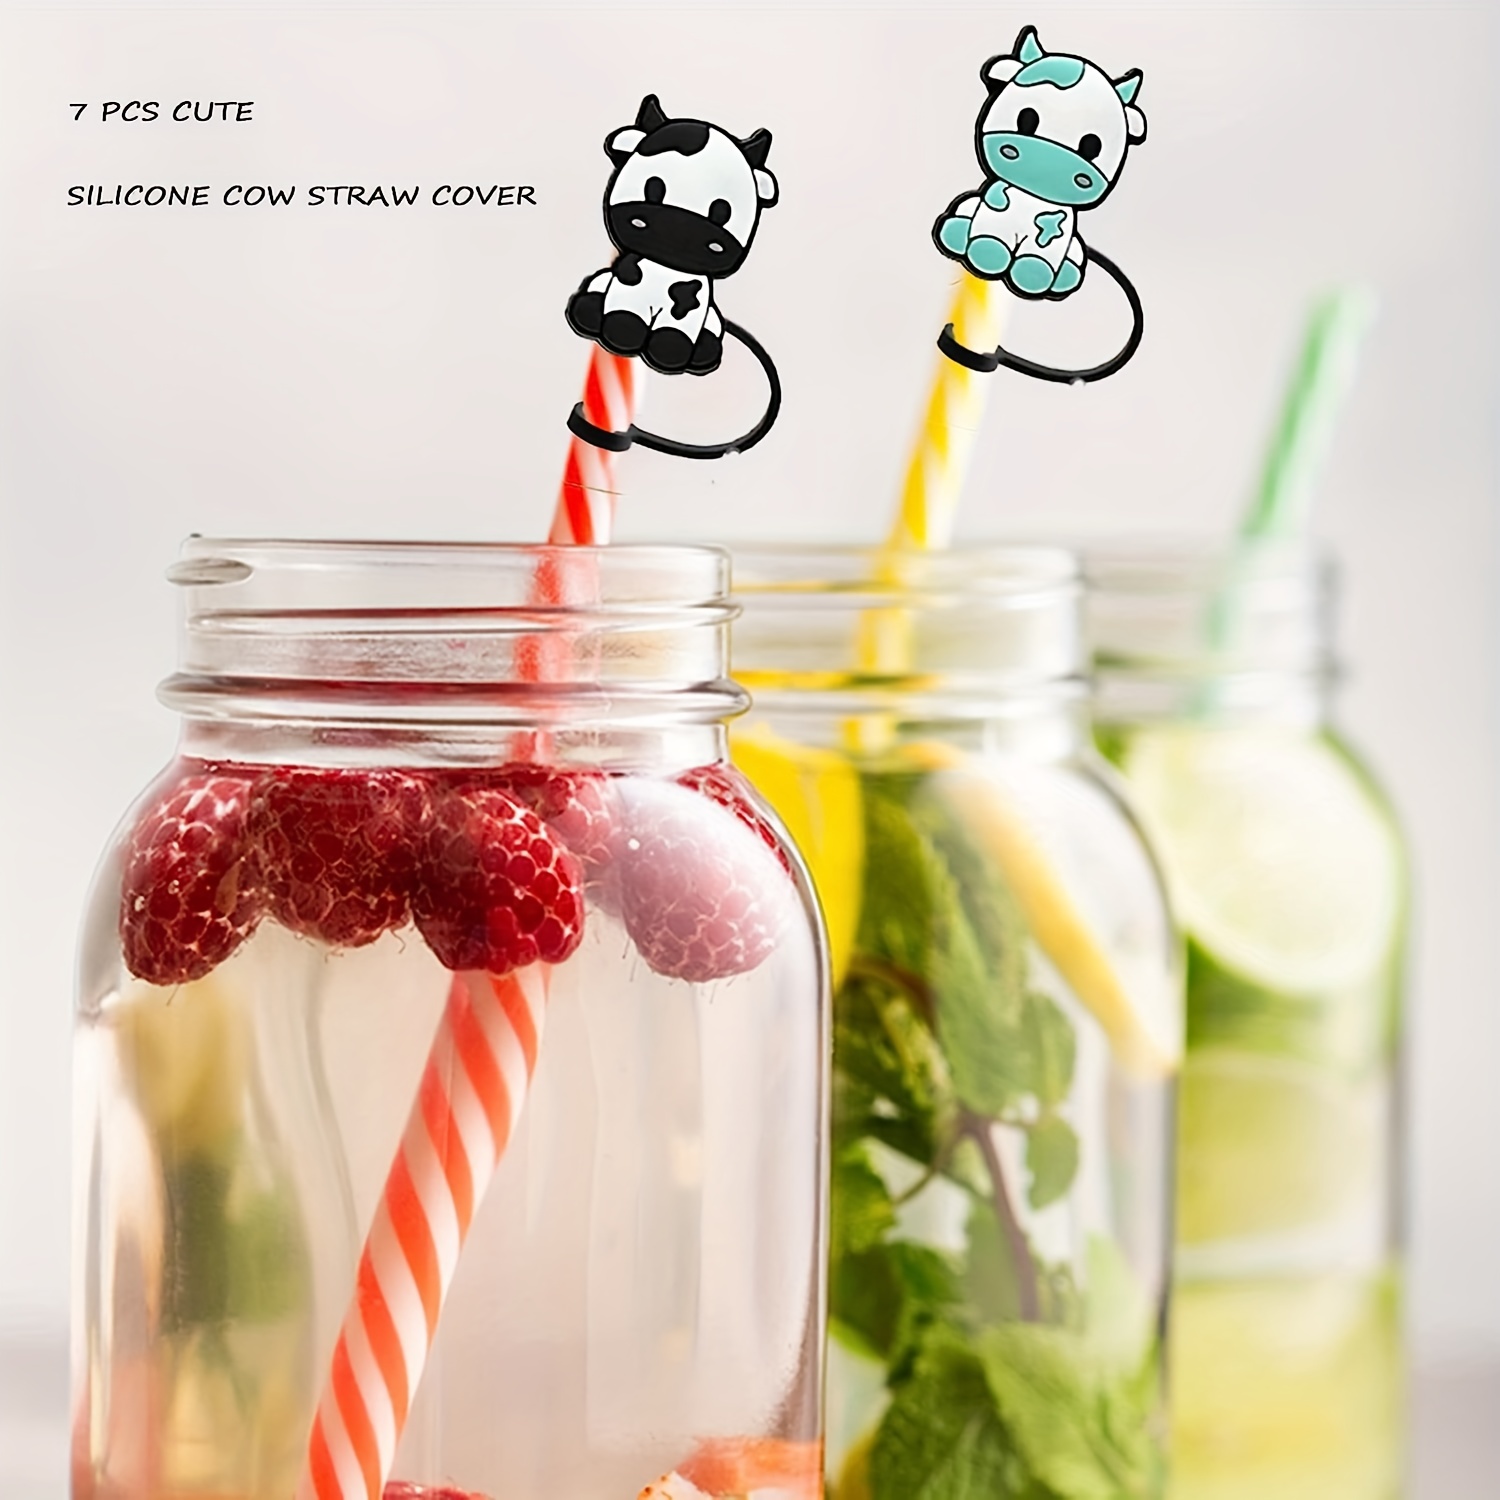 8 Pcs Reusable Straw Caps, Straw Covers for 8mm Straws, Silicone Straw Tips  Cover Protector, Portable Cute Dust-proof Straw Plugs for Straw Tips